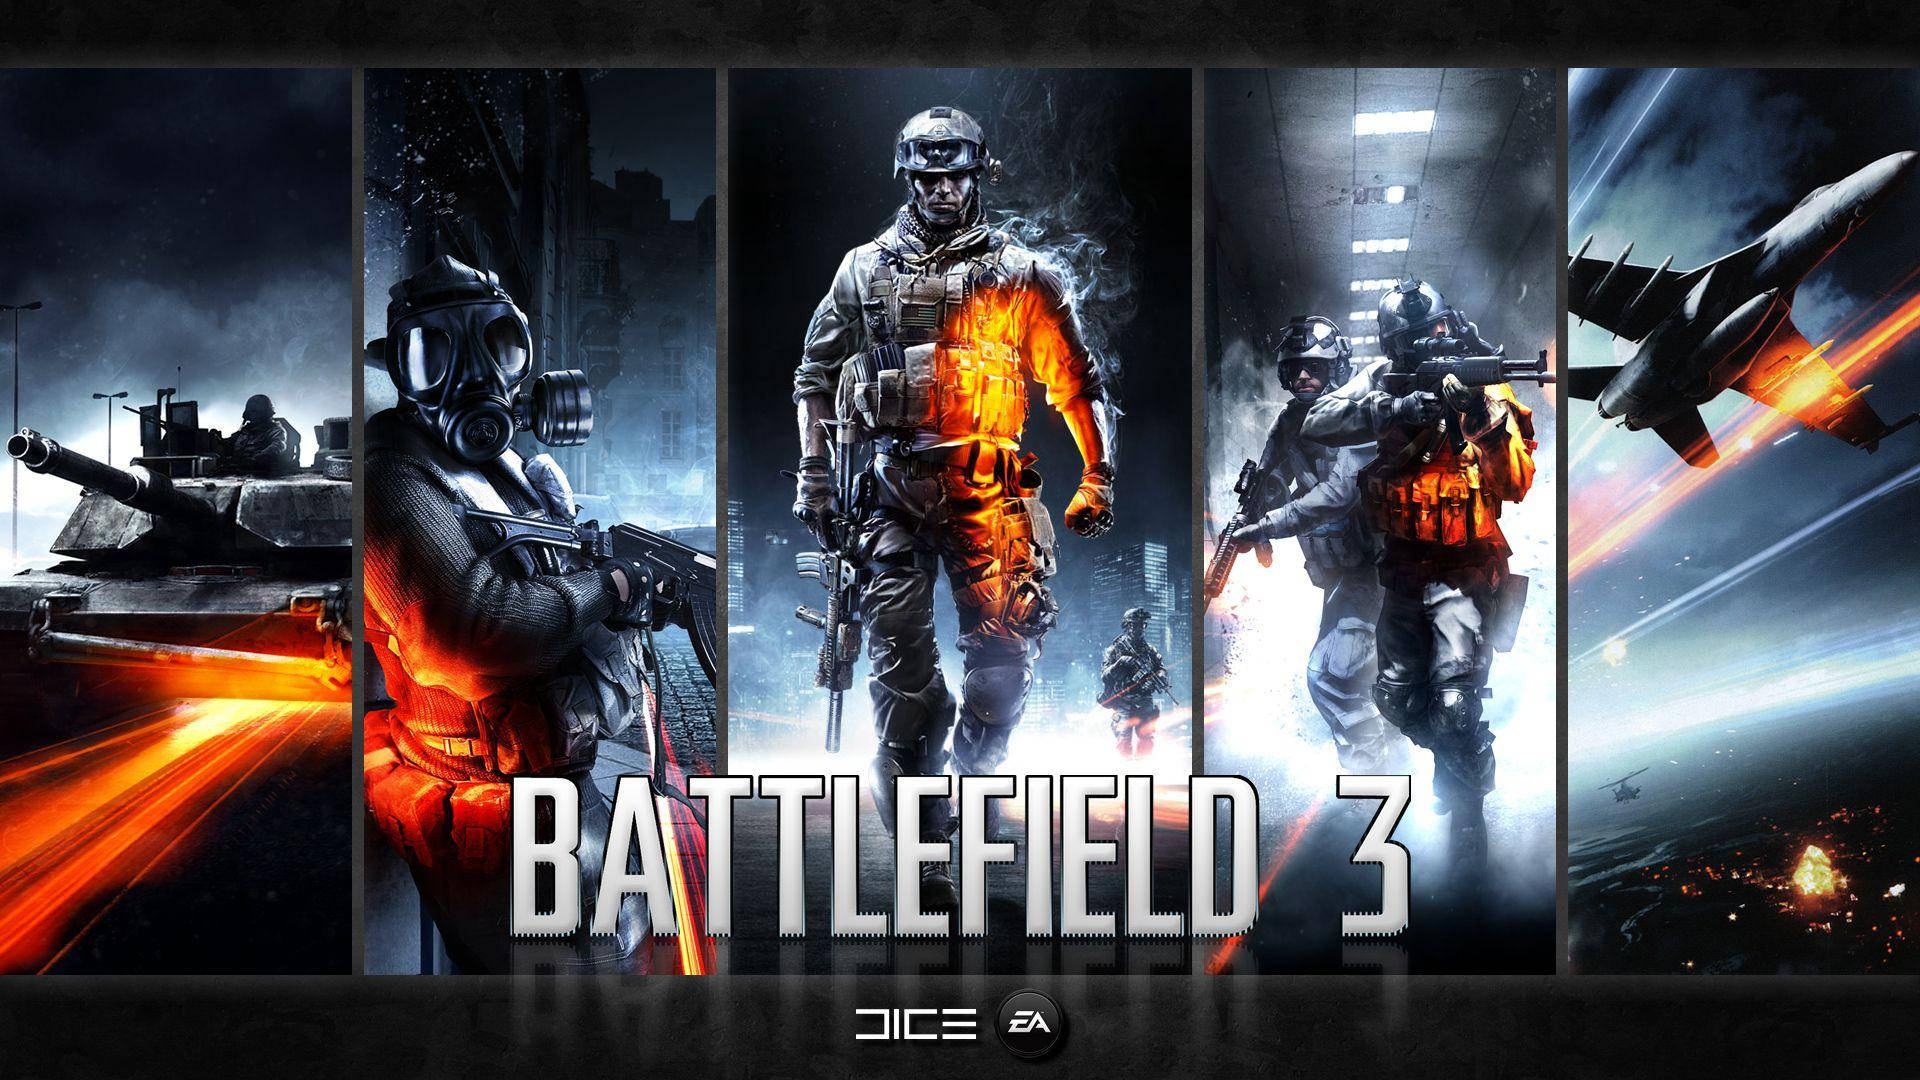 Gaming Poster Battlefield 3 Background